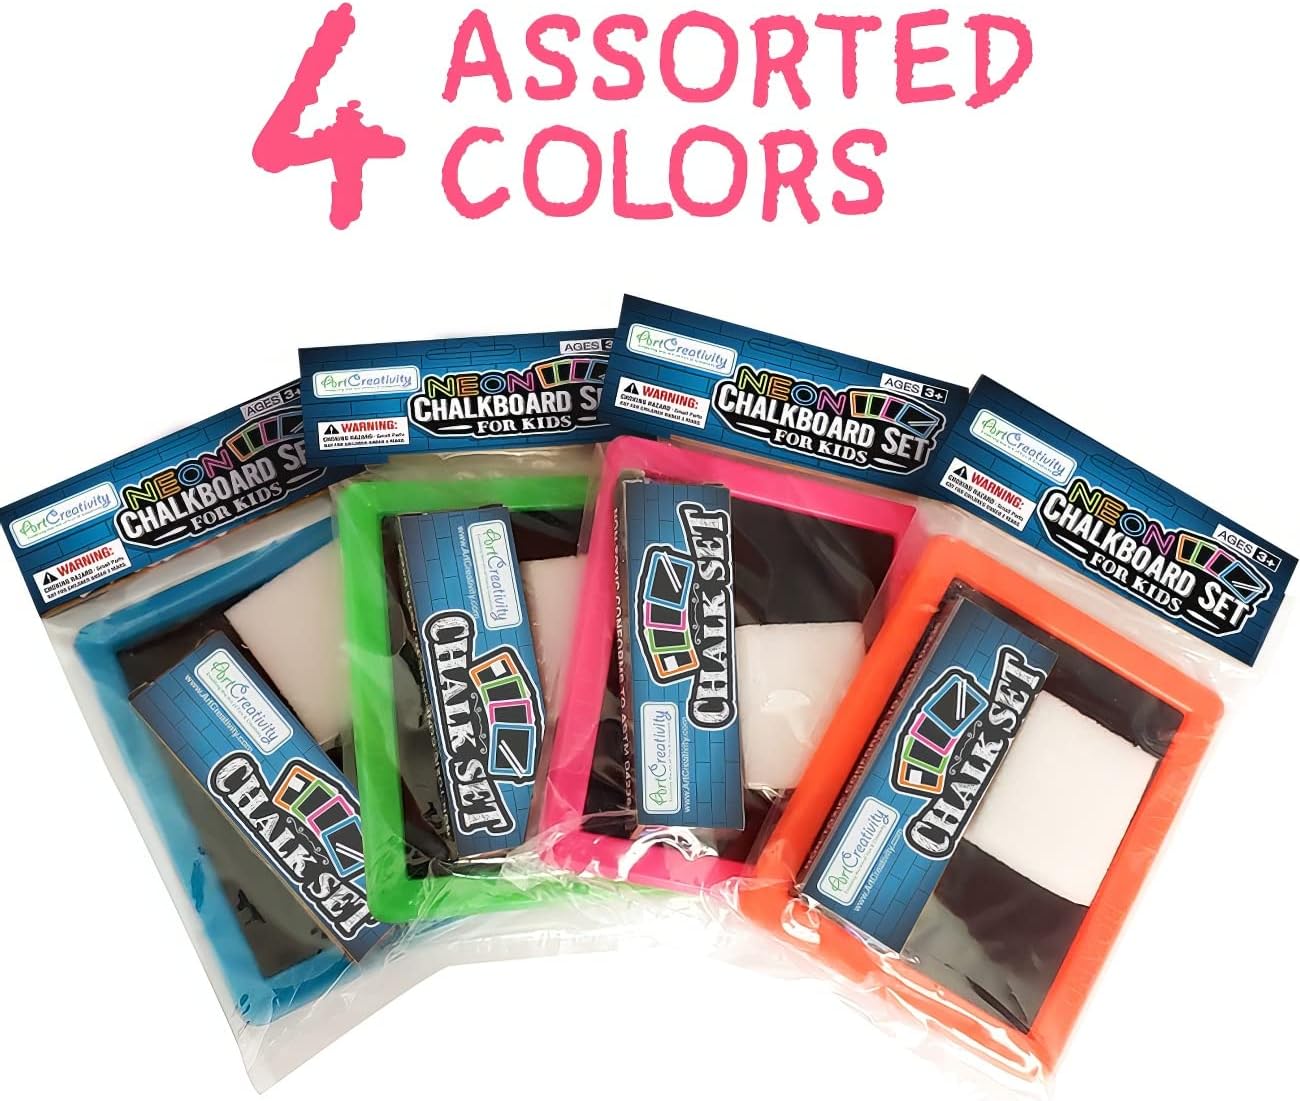 ArtCreativity Neon Chalkboard Set for Kids - 12 Kits - 1 Mini Chalk Board, 2 Chalk Sticks, and 1 Eraser Per Kit - Art Birthday Party Favors for Boys and Girls, Unique Stationery Goodie Bag Fillers